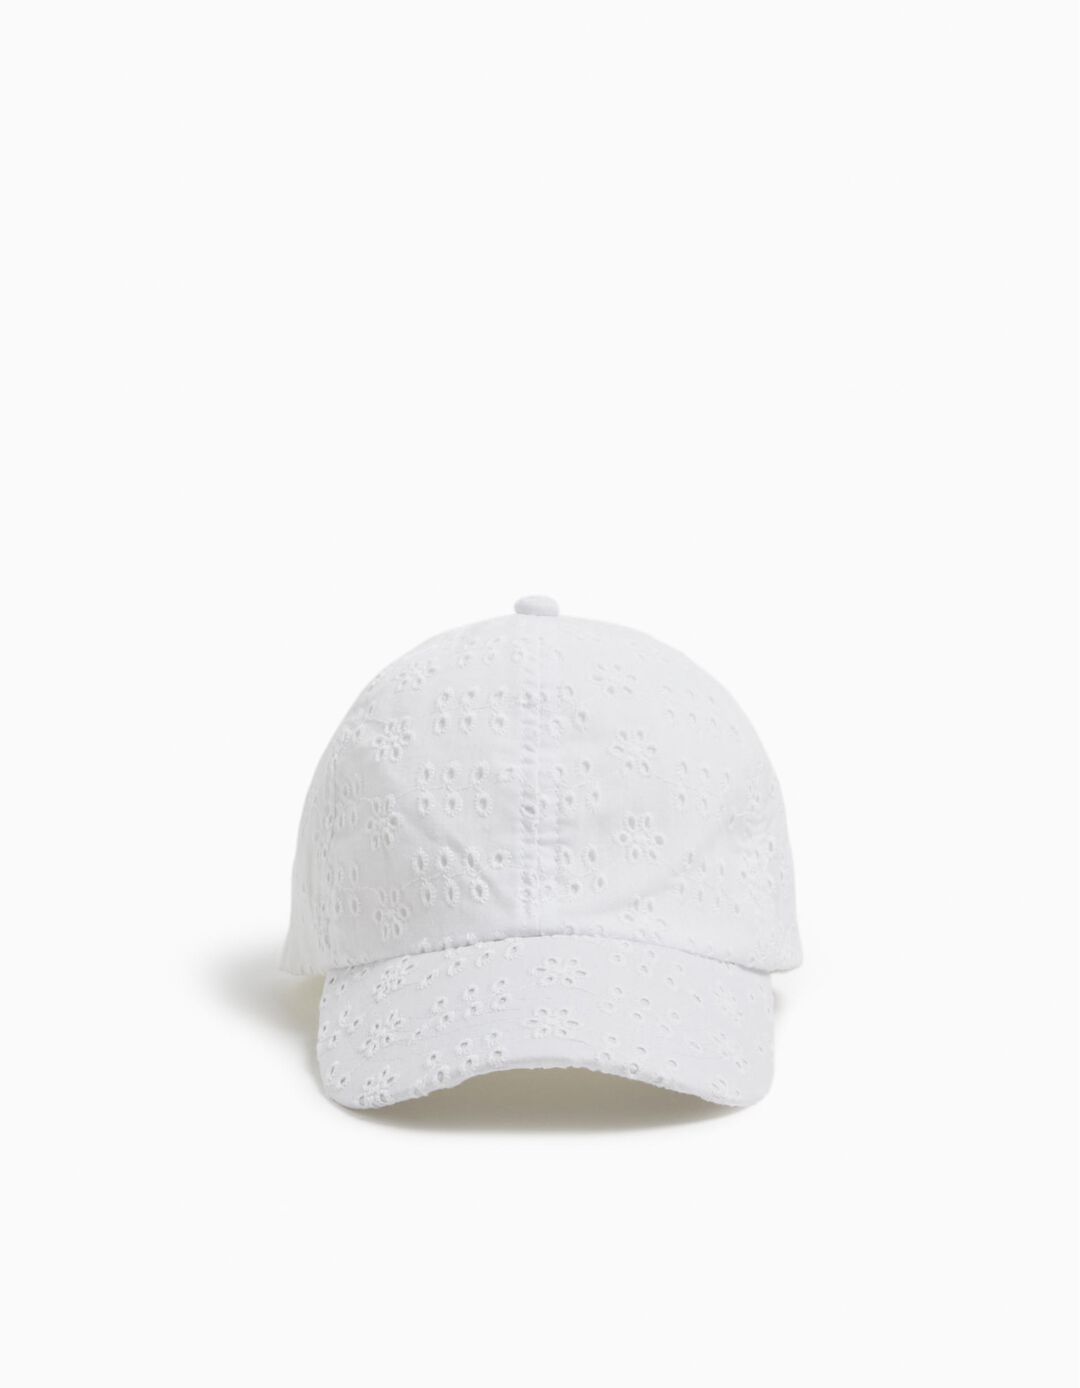 English Embroidered Cap, Girl, White